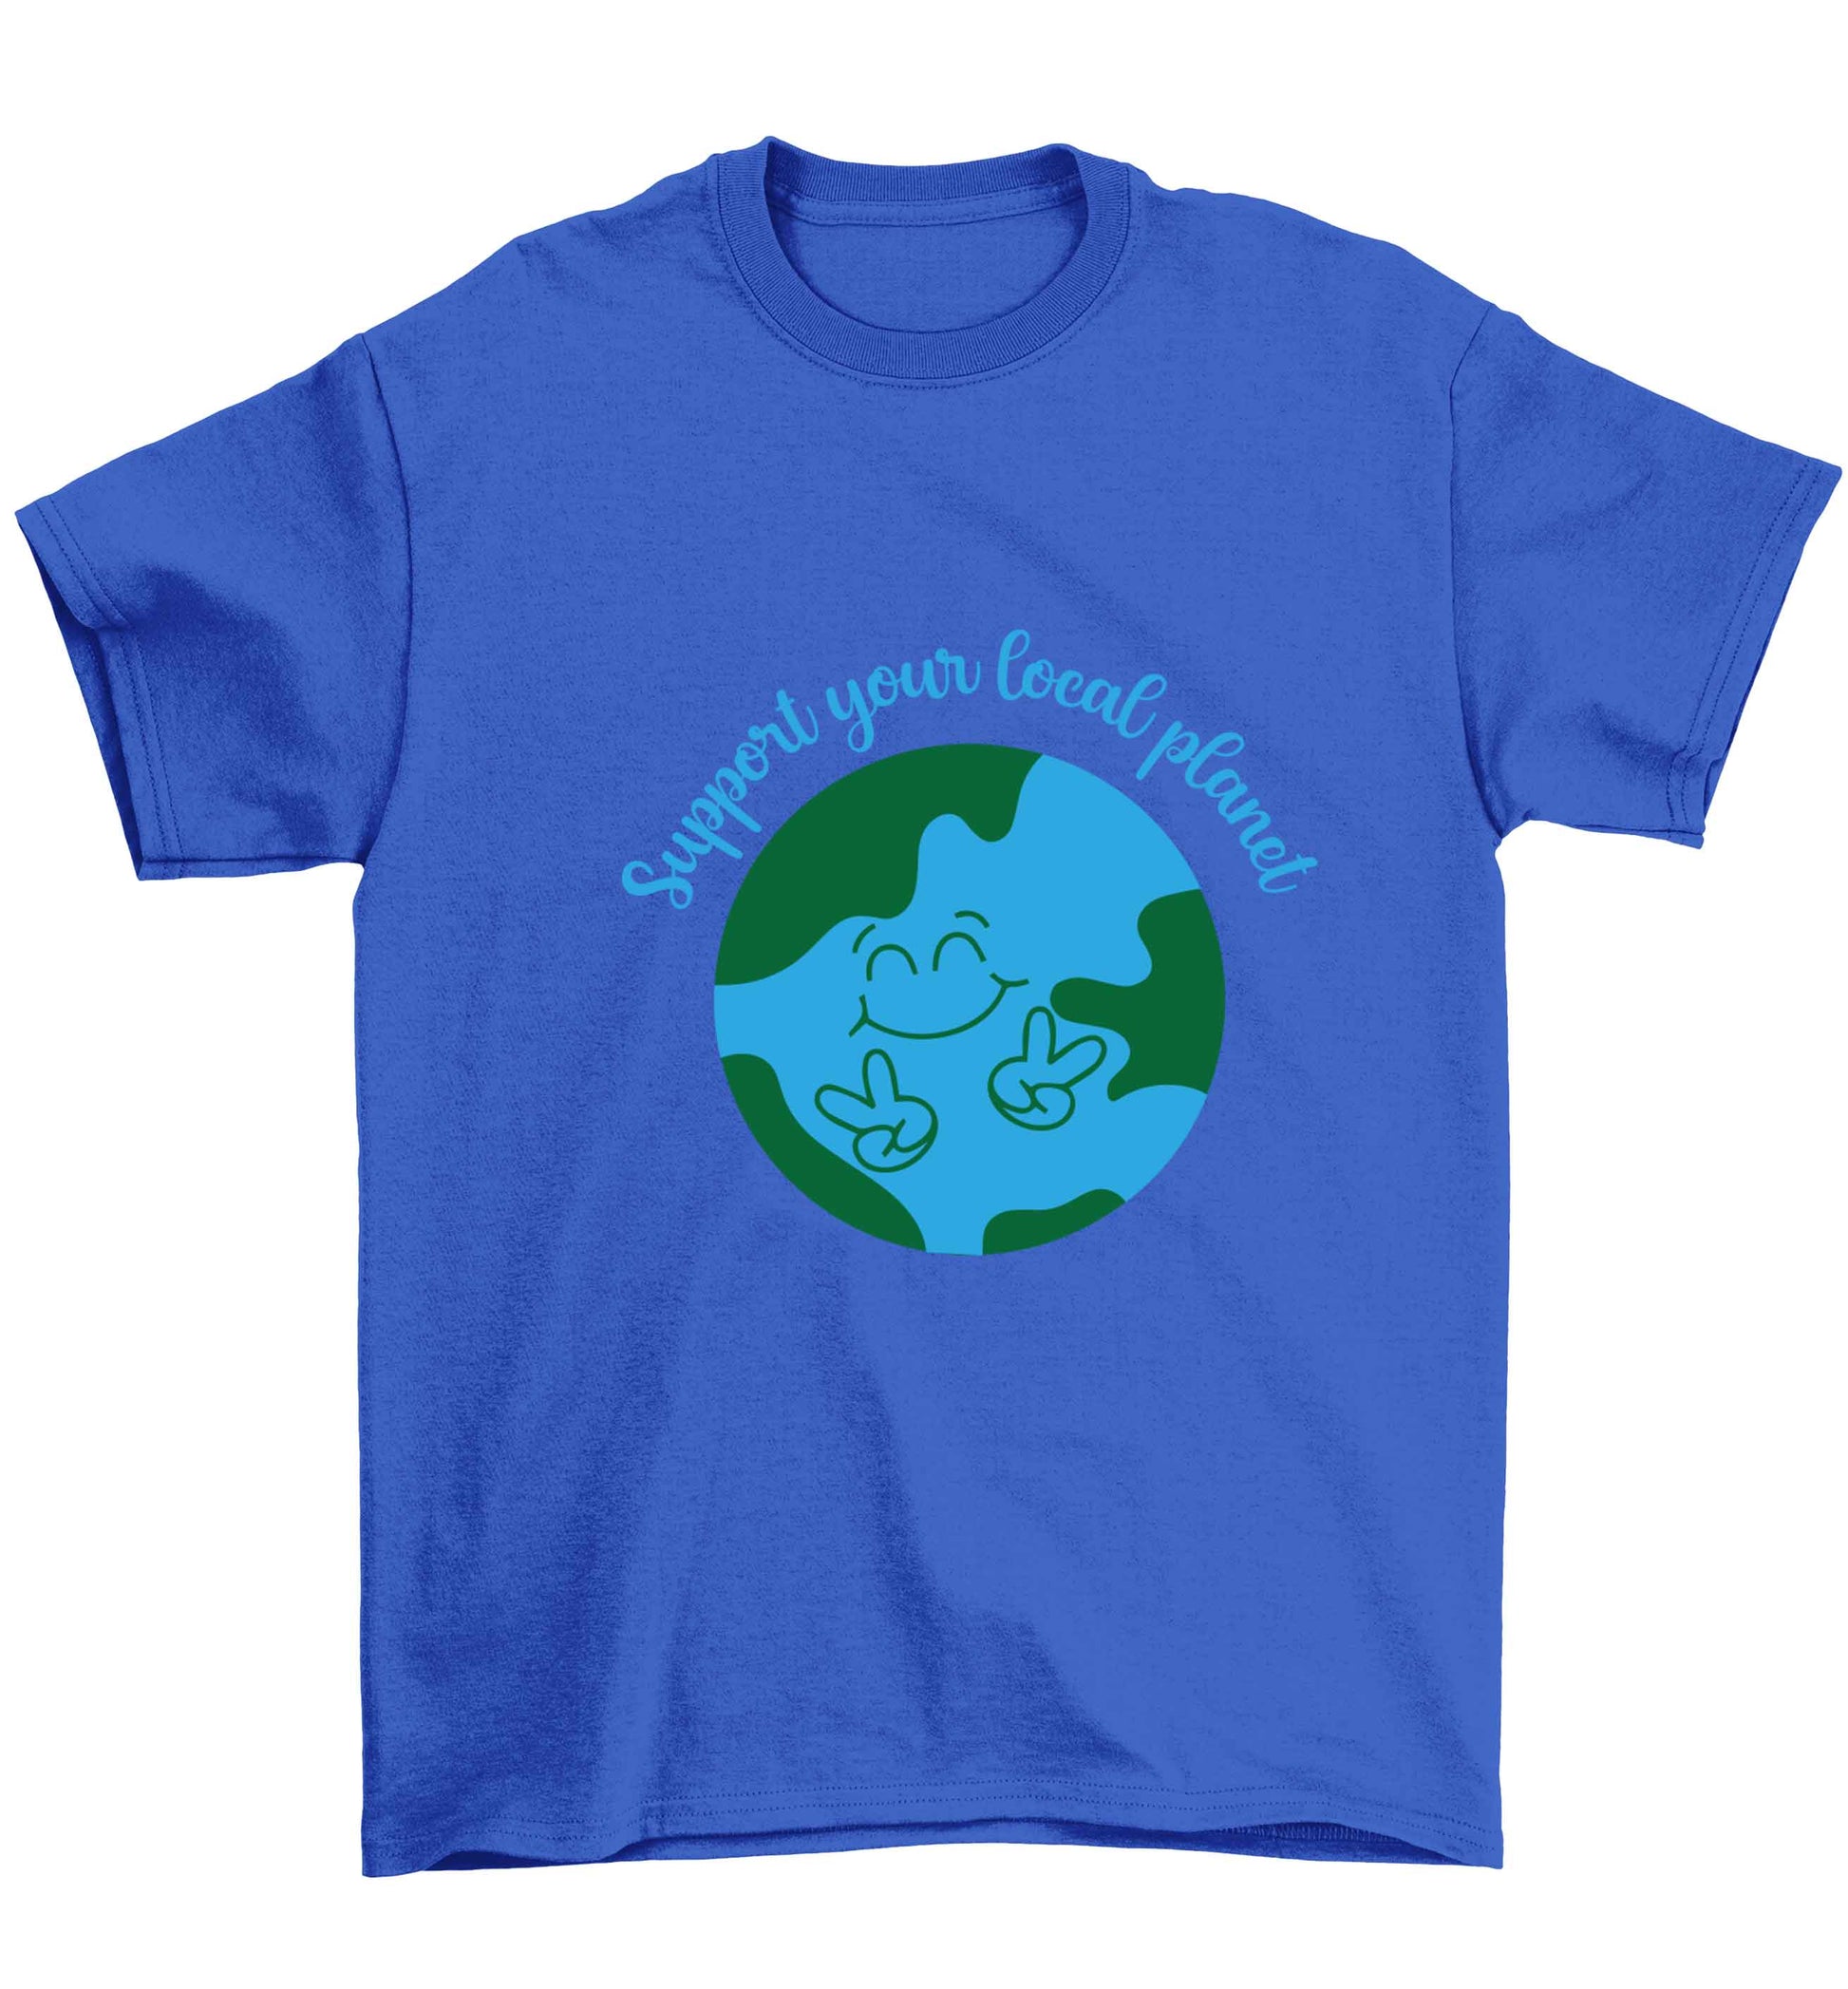 Support your local planet Children's blue Tshirt 12-13 Years